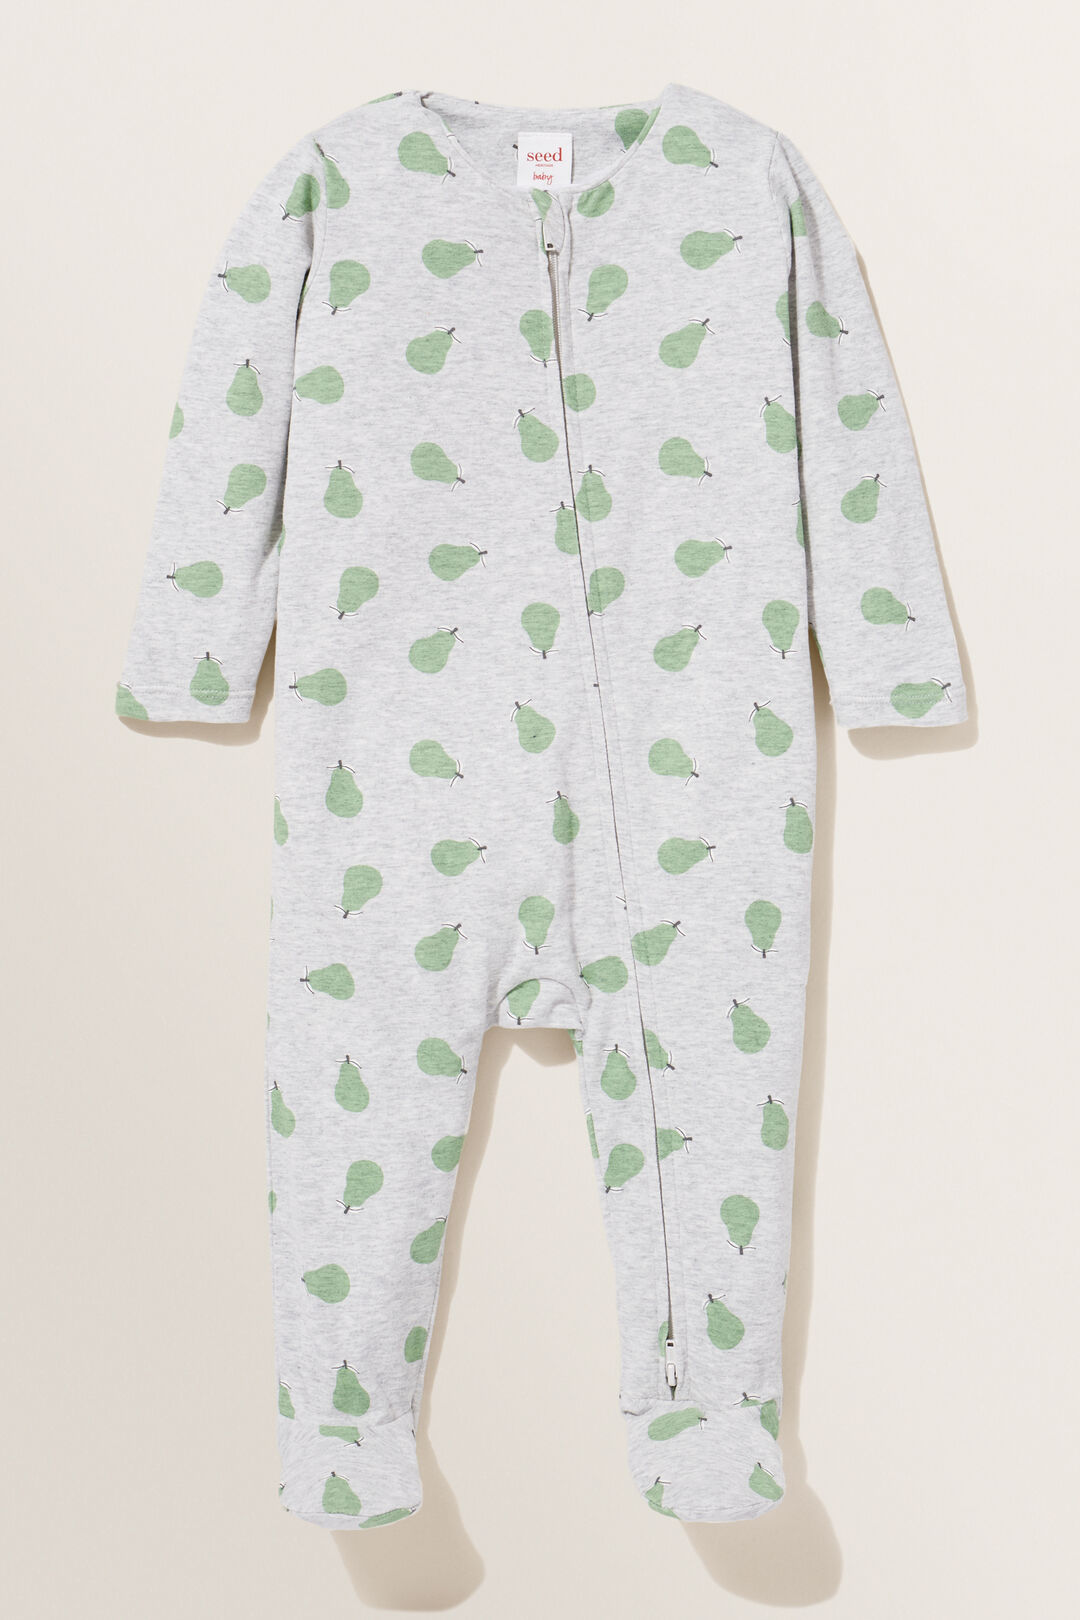 Seed Pear Zipsuit